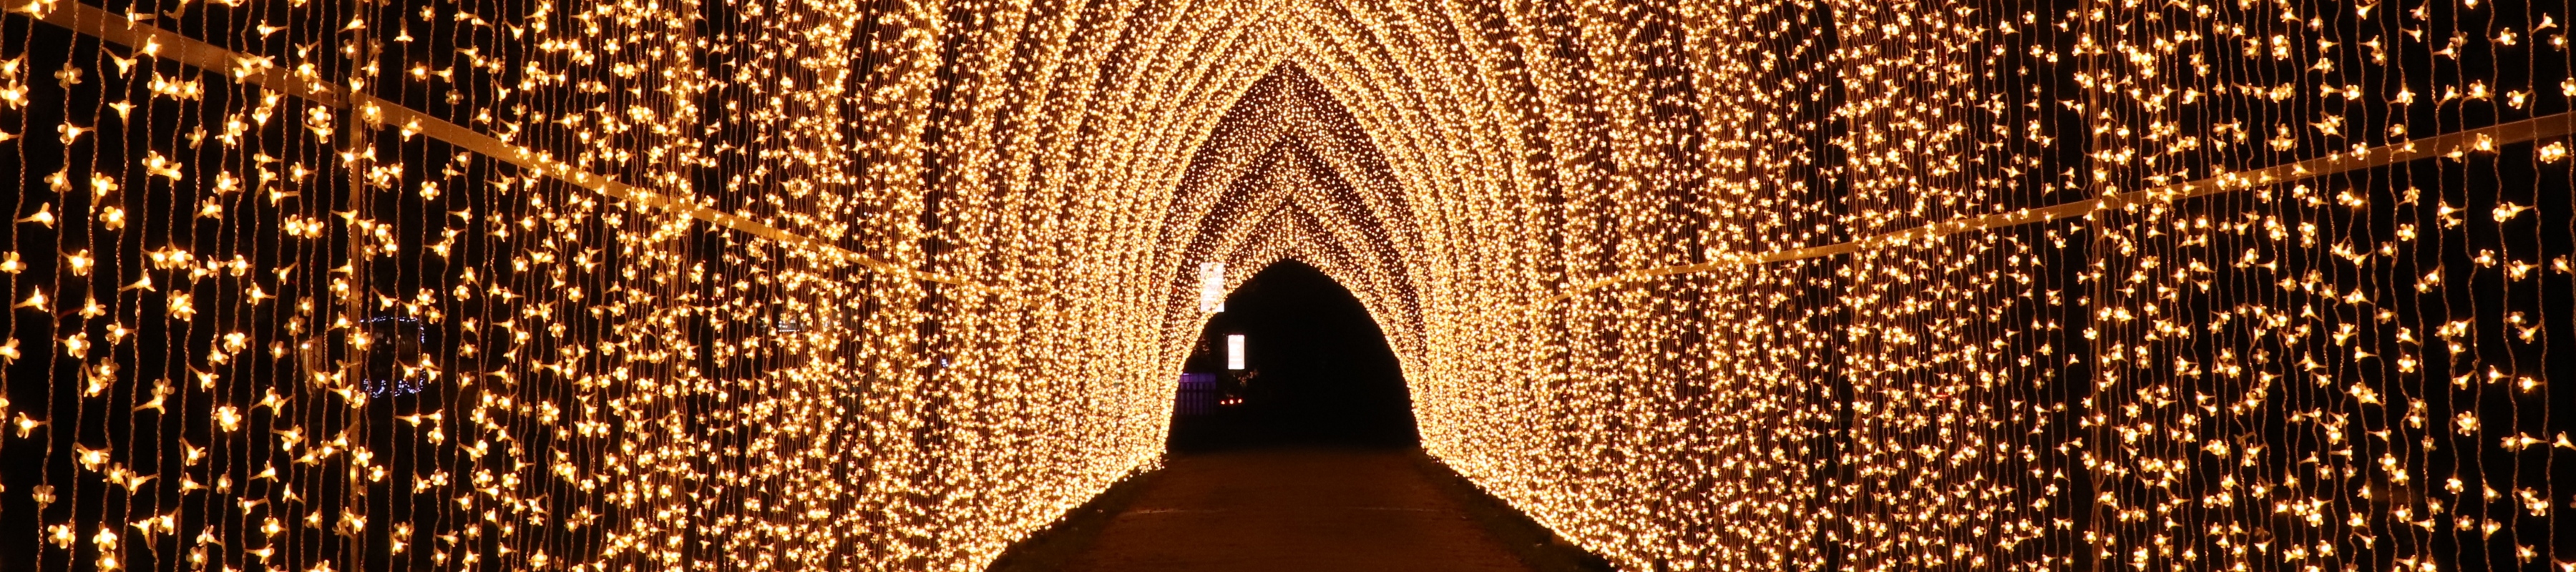 Cascades of white light forming a bright tunnel